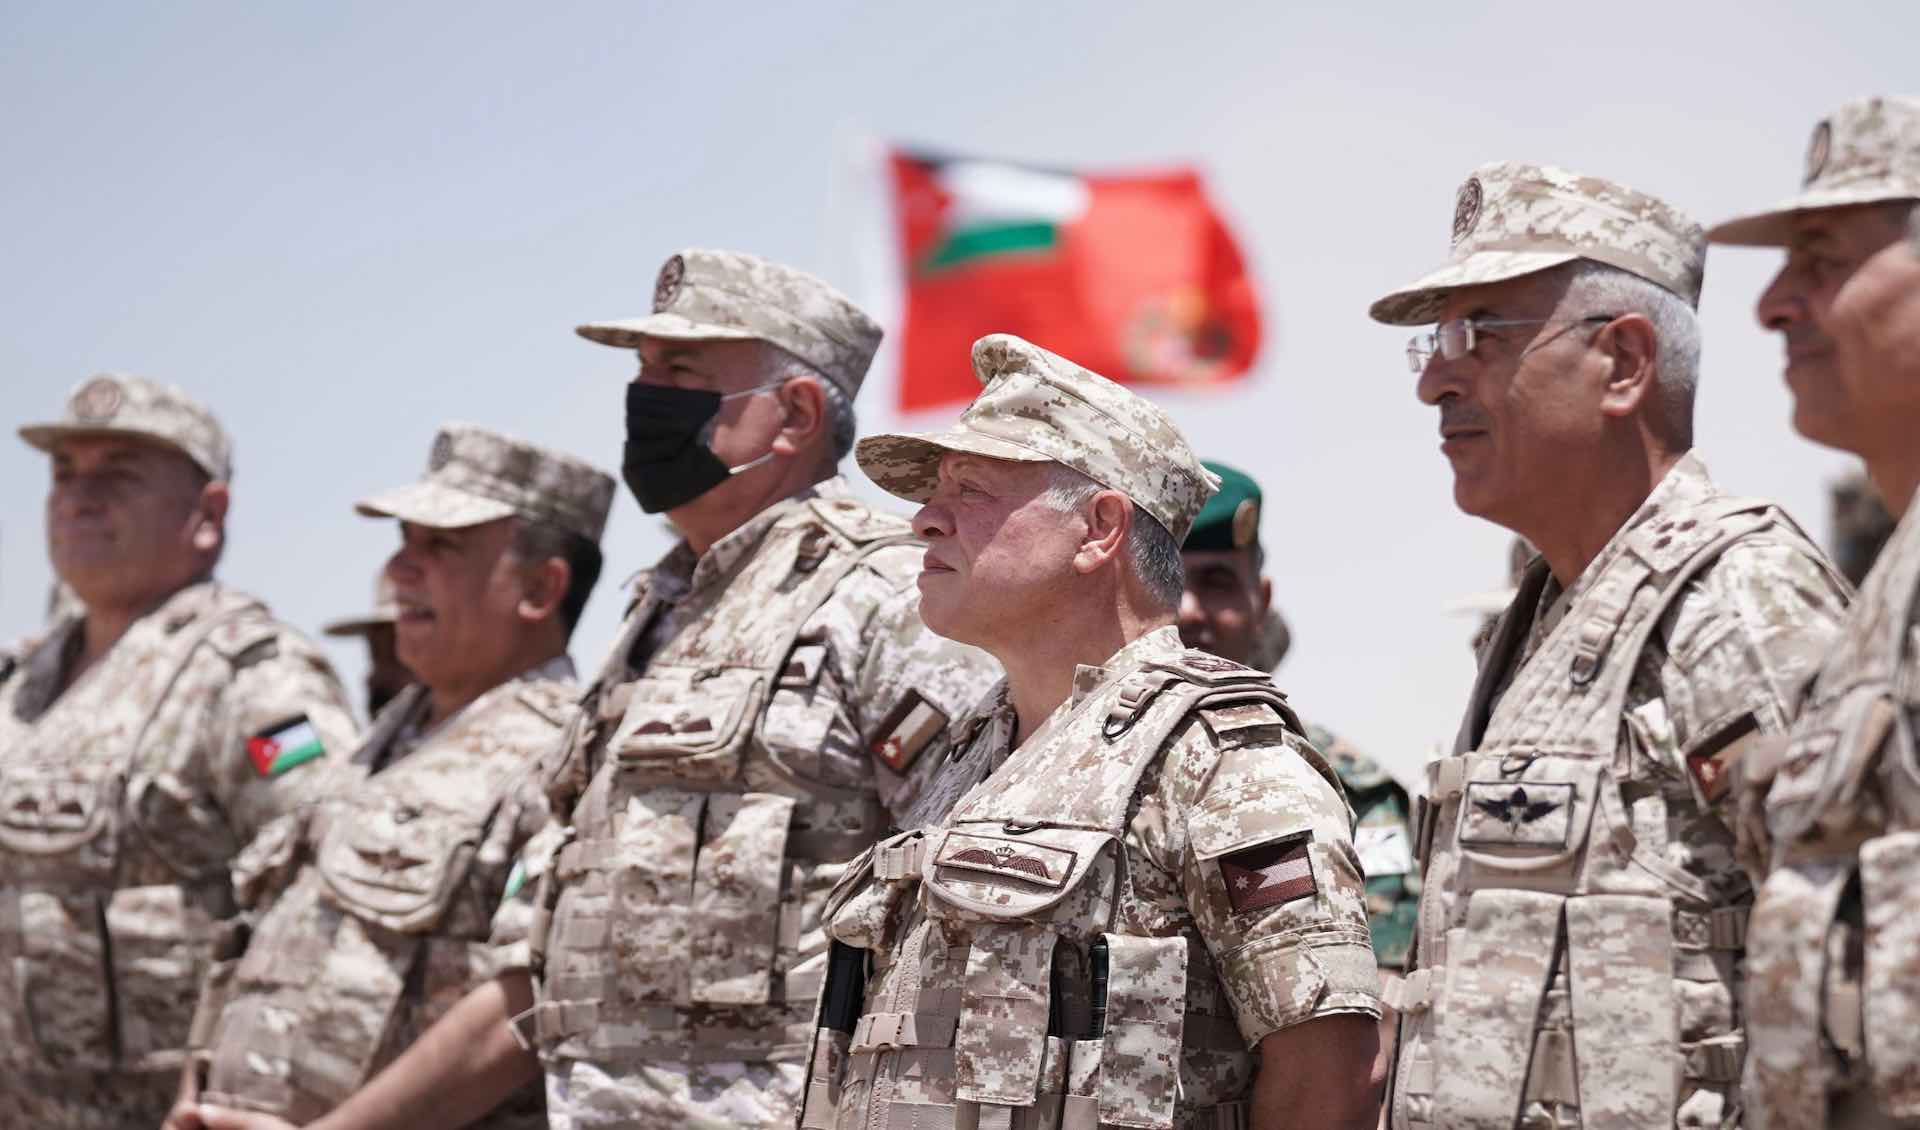 King Abdullah attends tactical military exercise